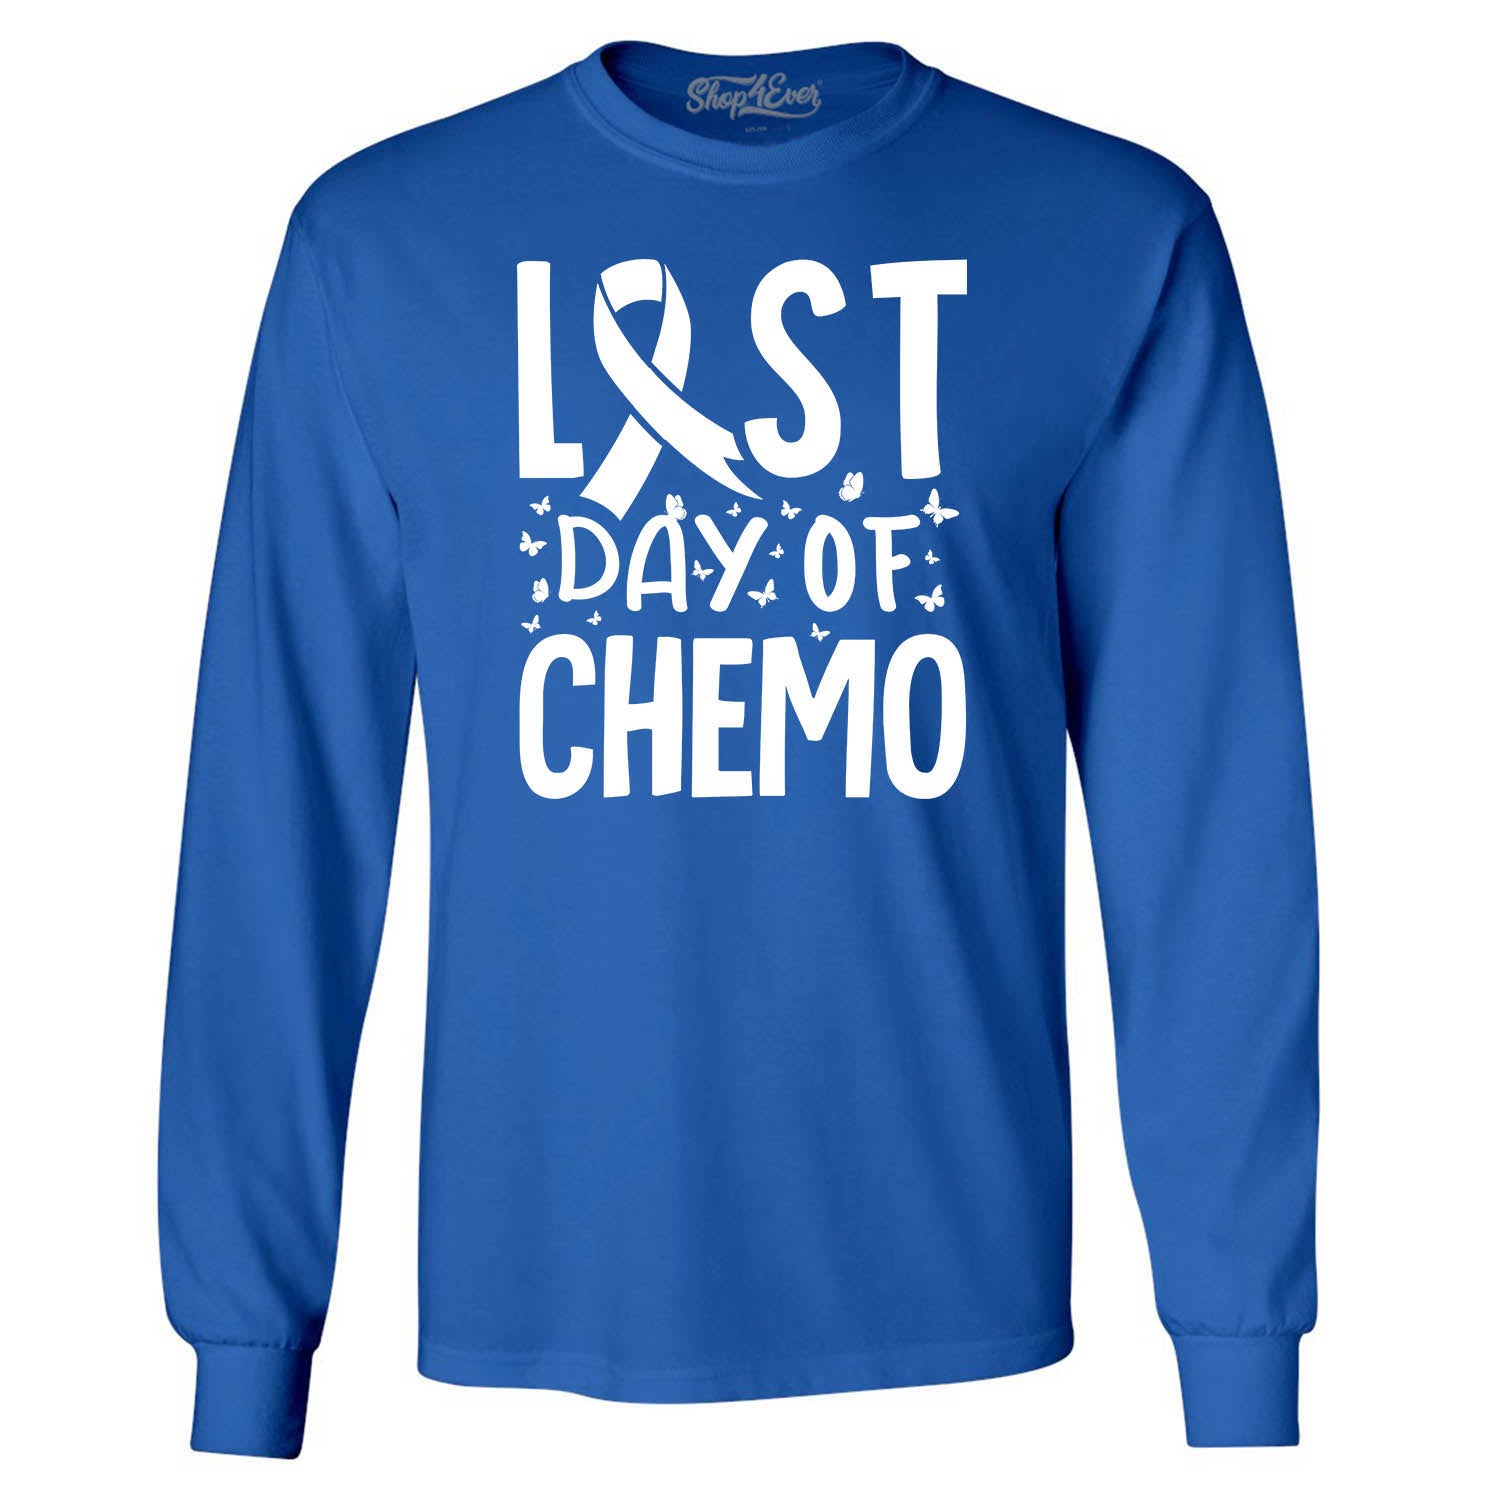 Last Day of Chemo Celebrate Cancer Survivor Long Sleeve Shirt